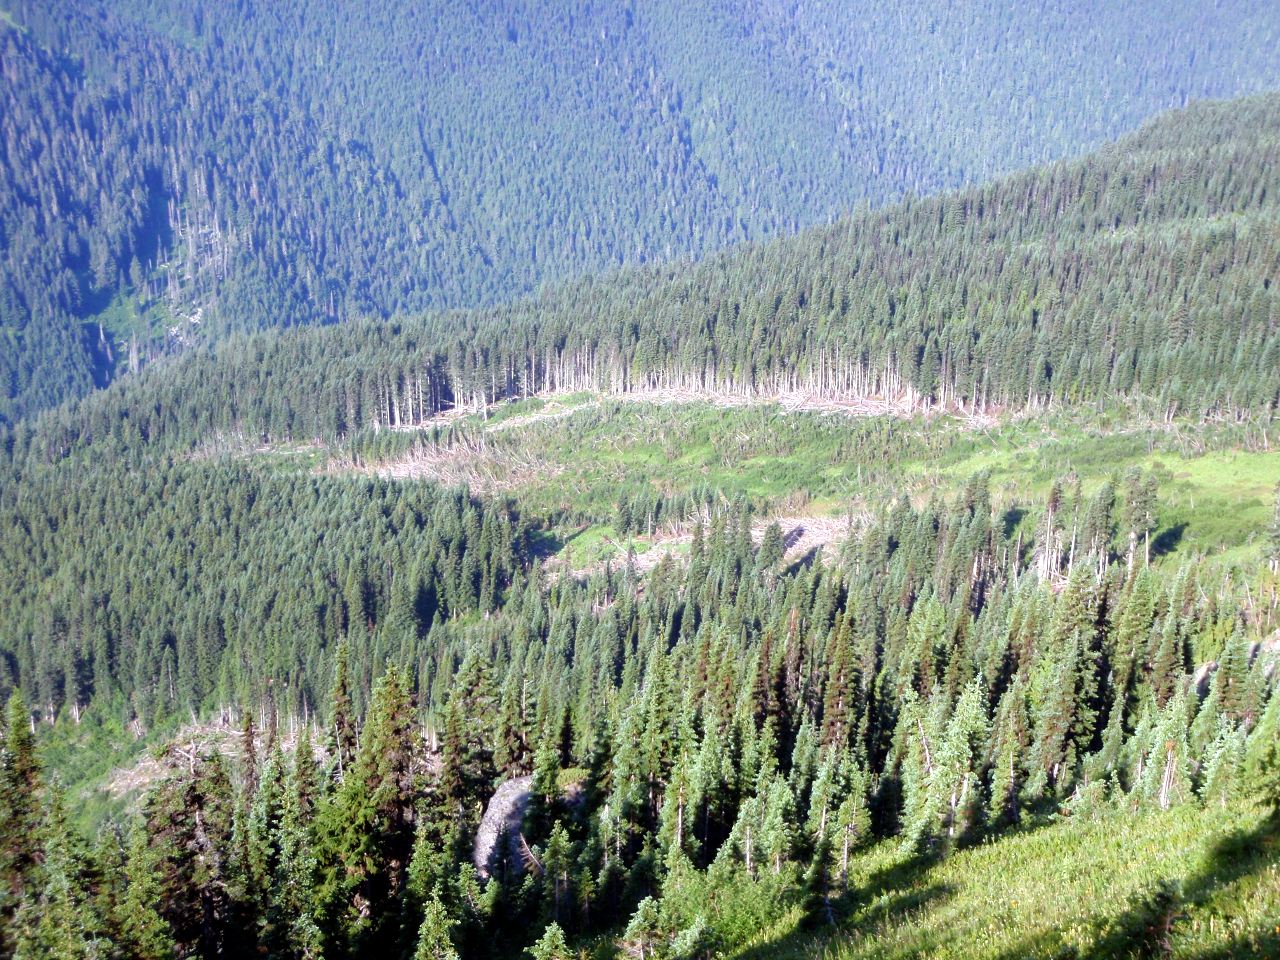 Avalanche runout across SBs on the North Fork Sauk trail